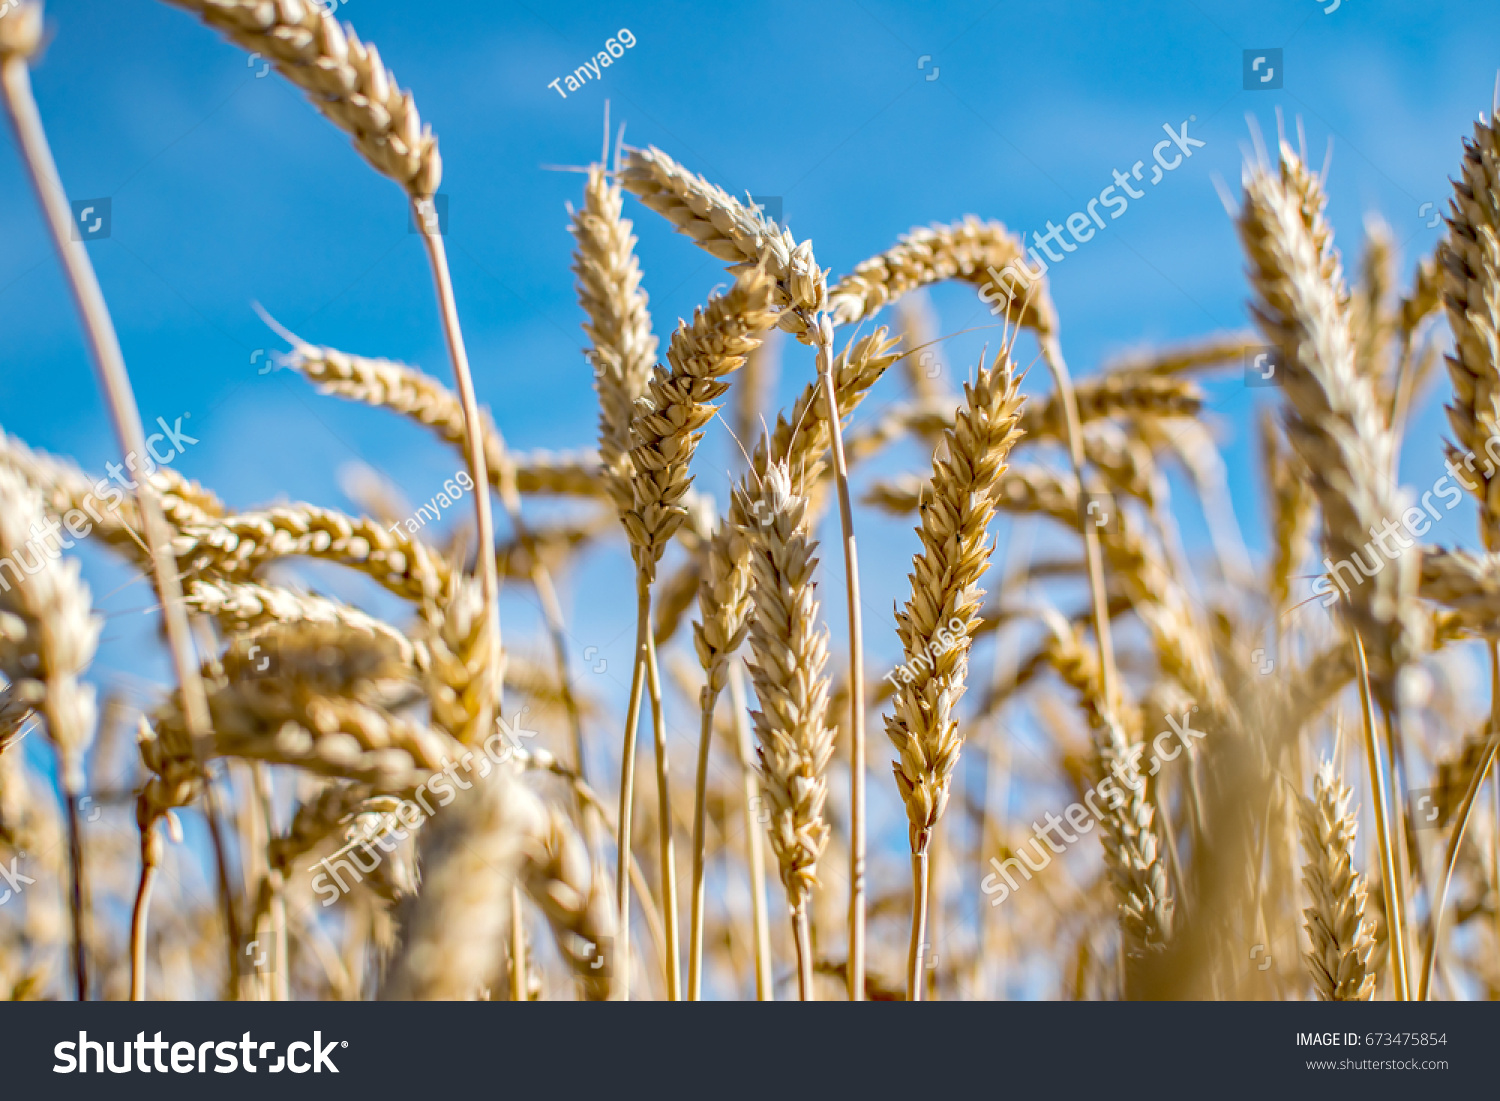 Rye field. Ripe grain spikelets. Cover crop and a forage crop. Blue sky background. Agricultural concept. Gramineae #673475854